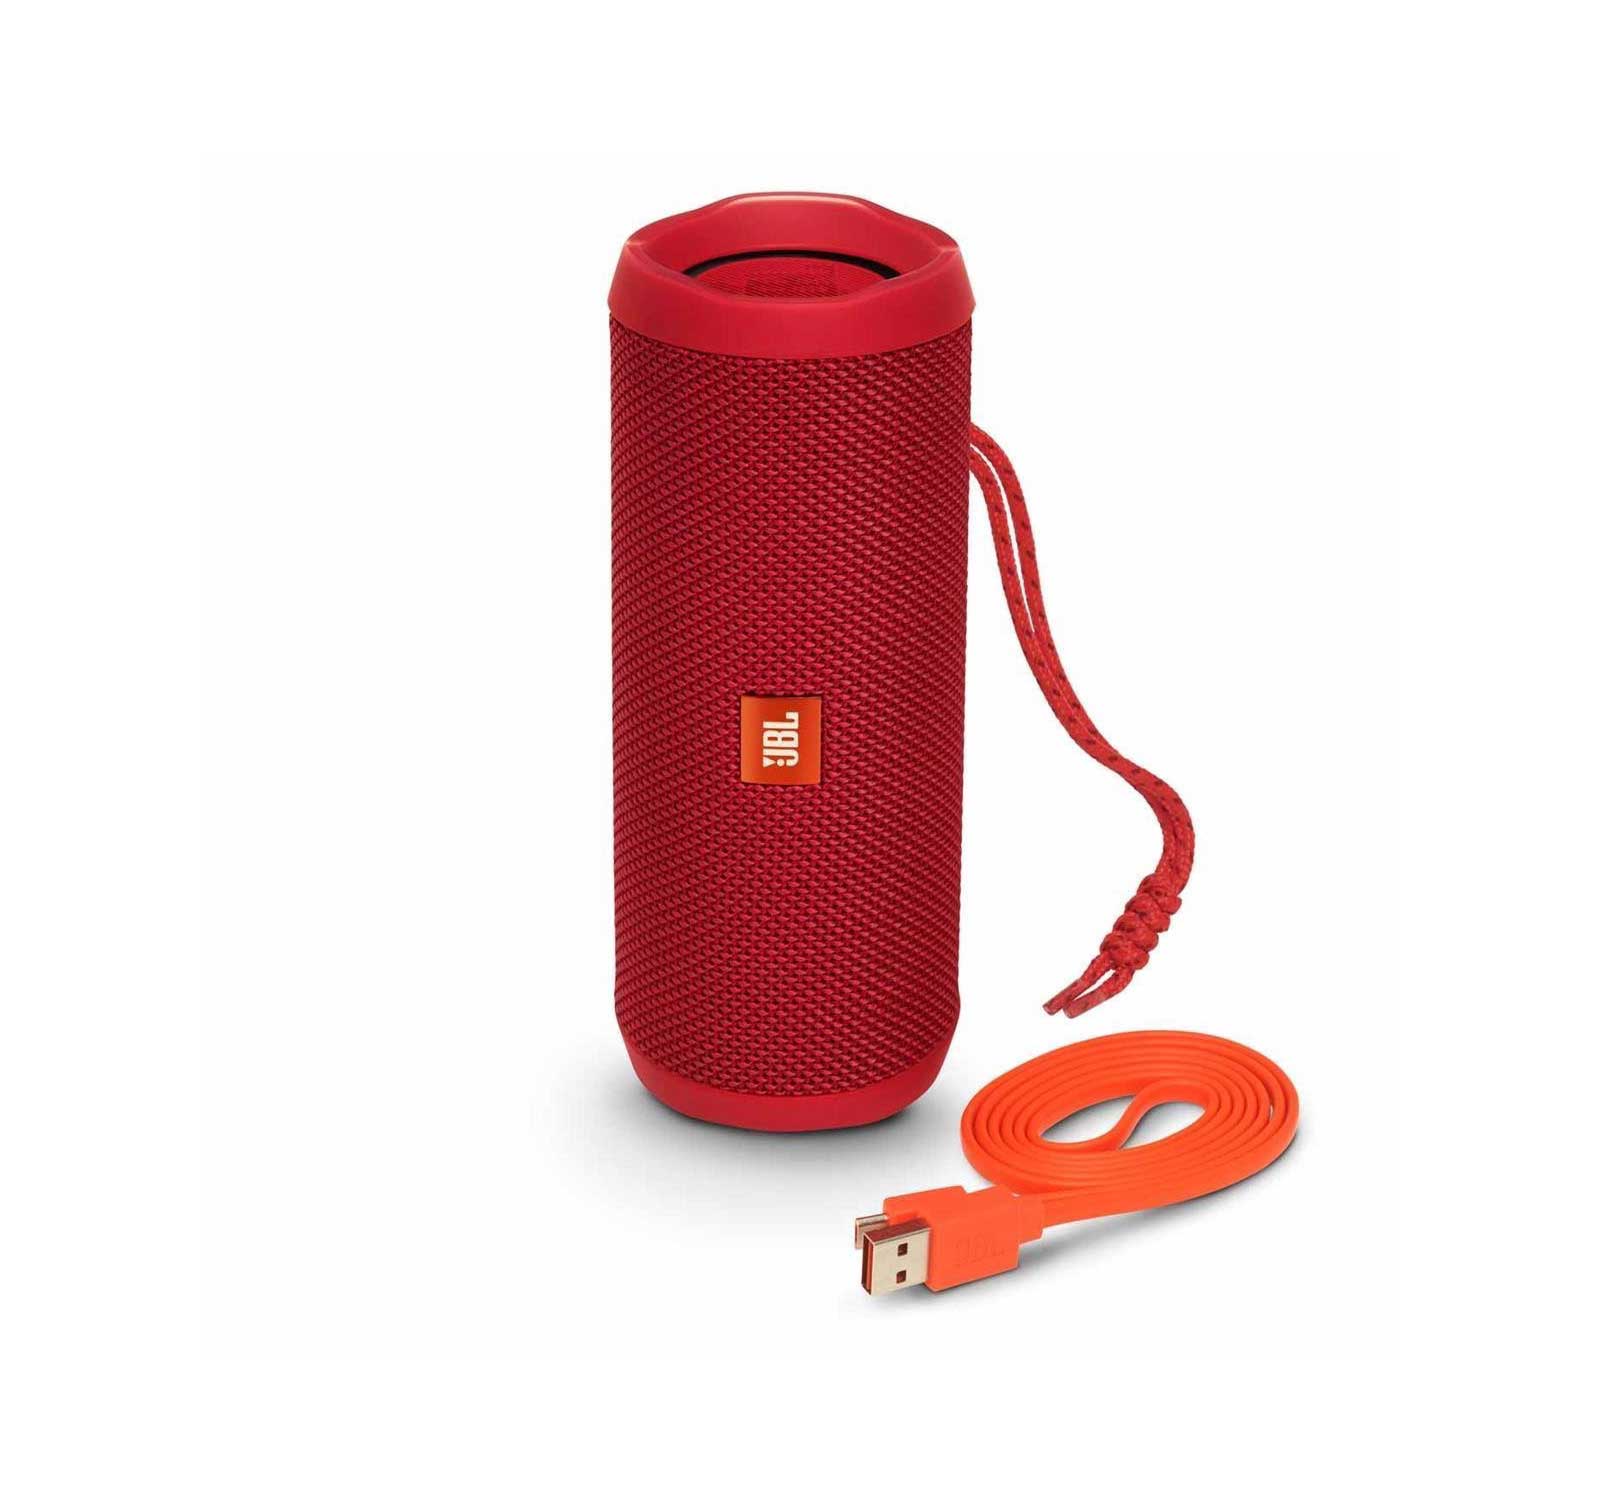 Waterproof Portable Bluetooth Speaker with 12 hours of playtime and powerful sound - image 2 of 3